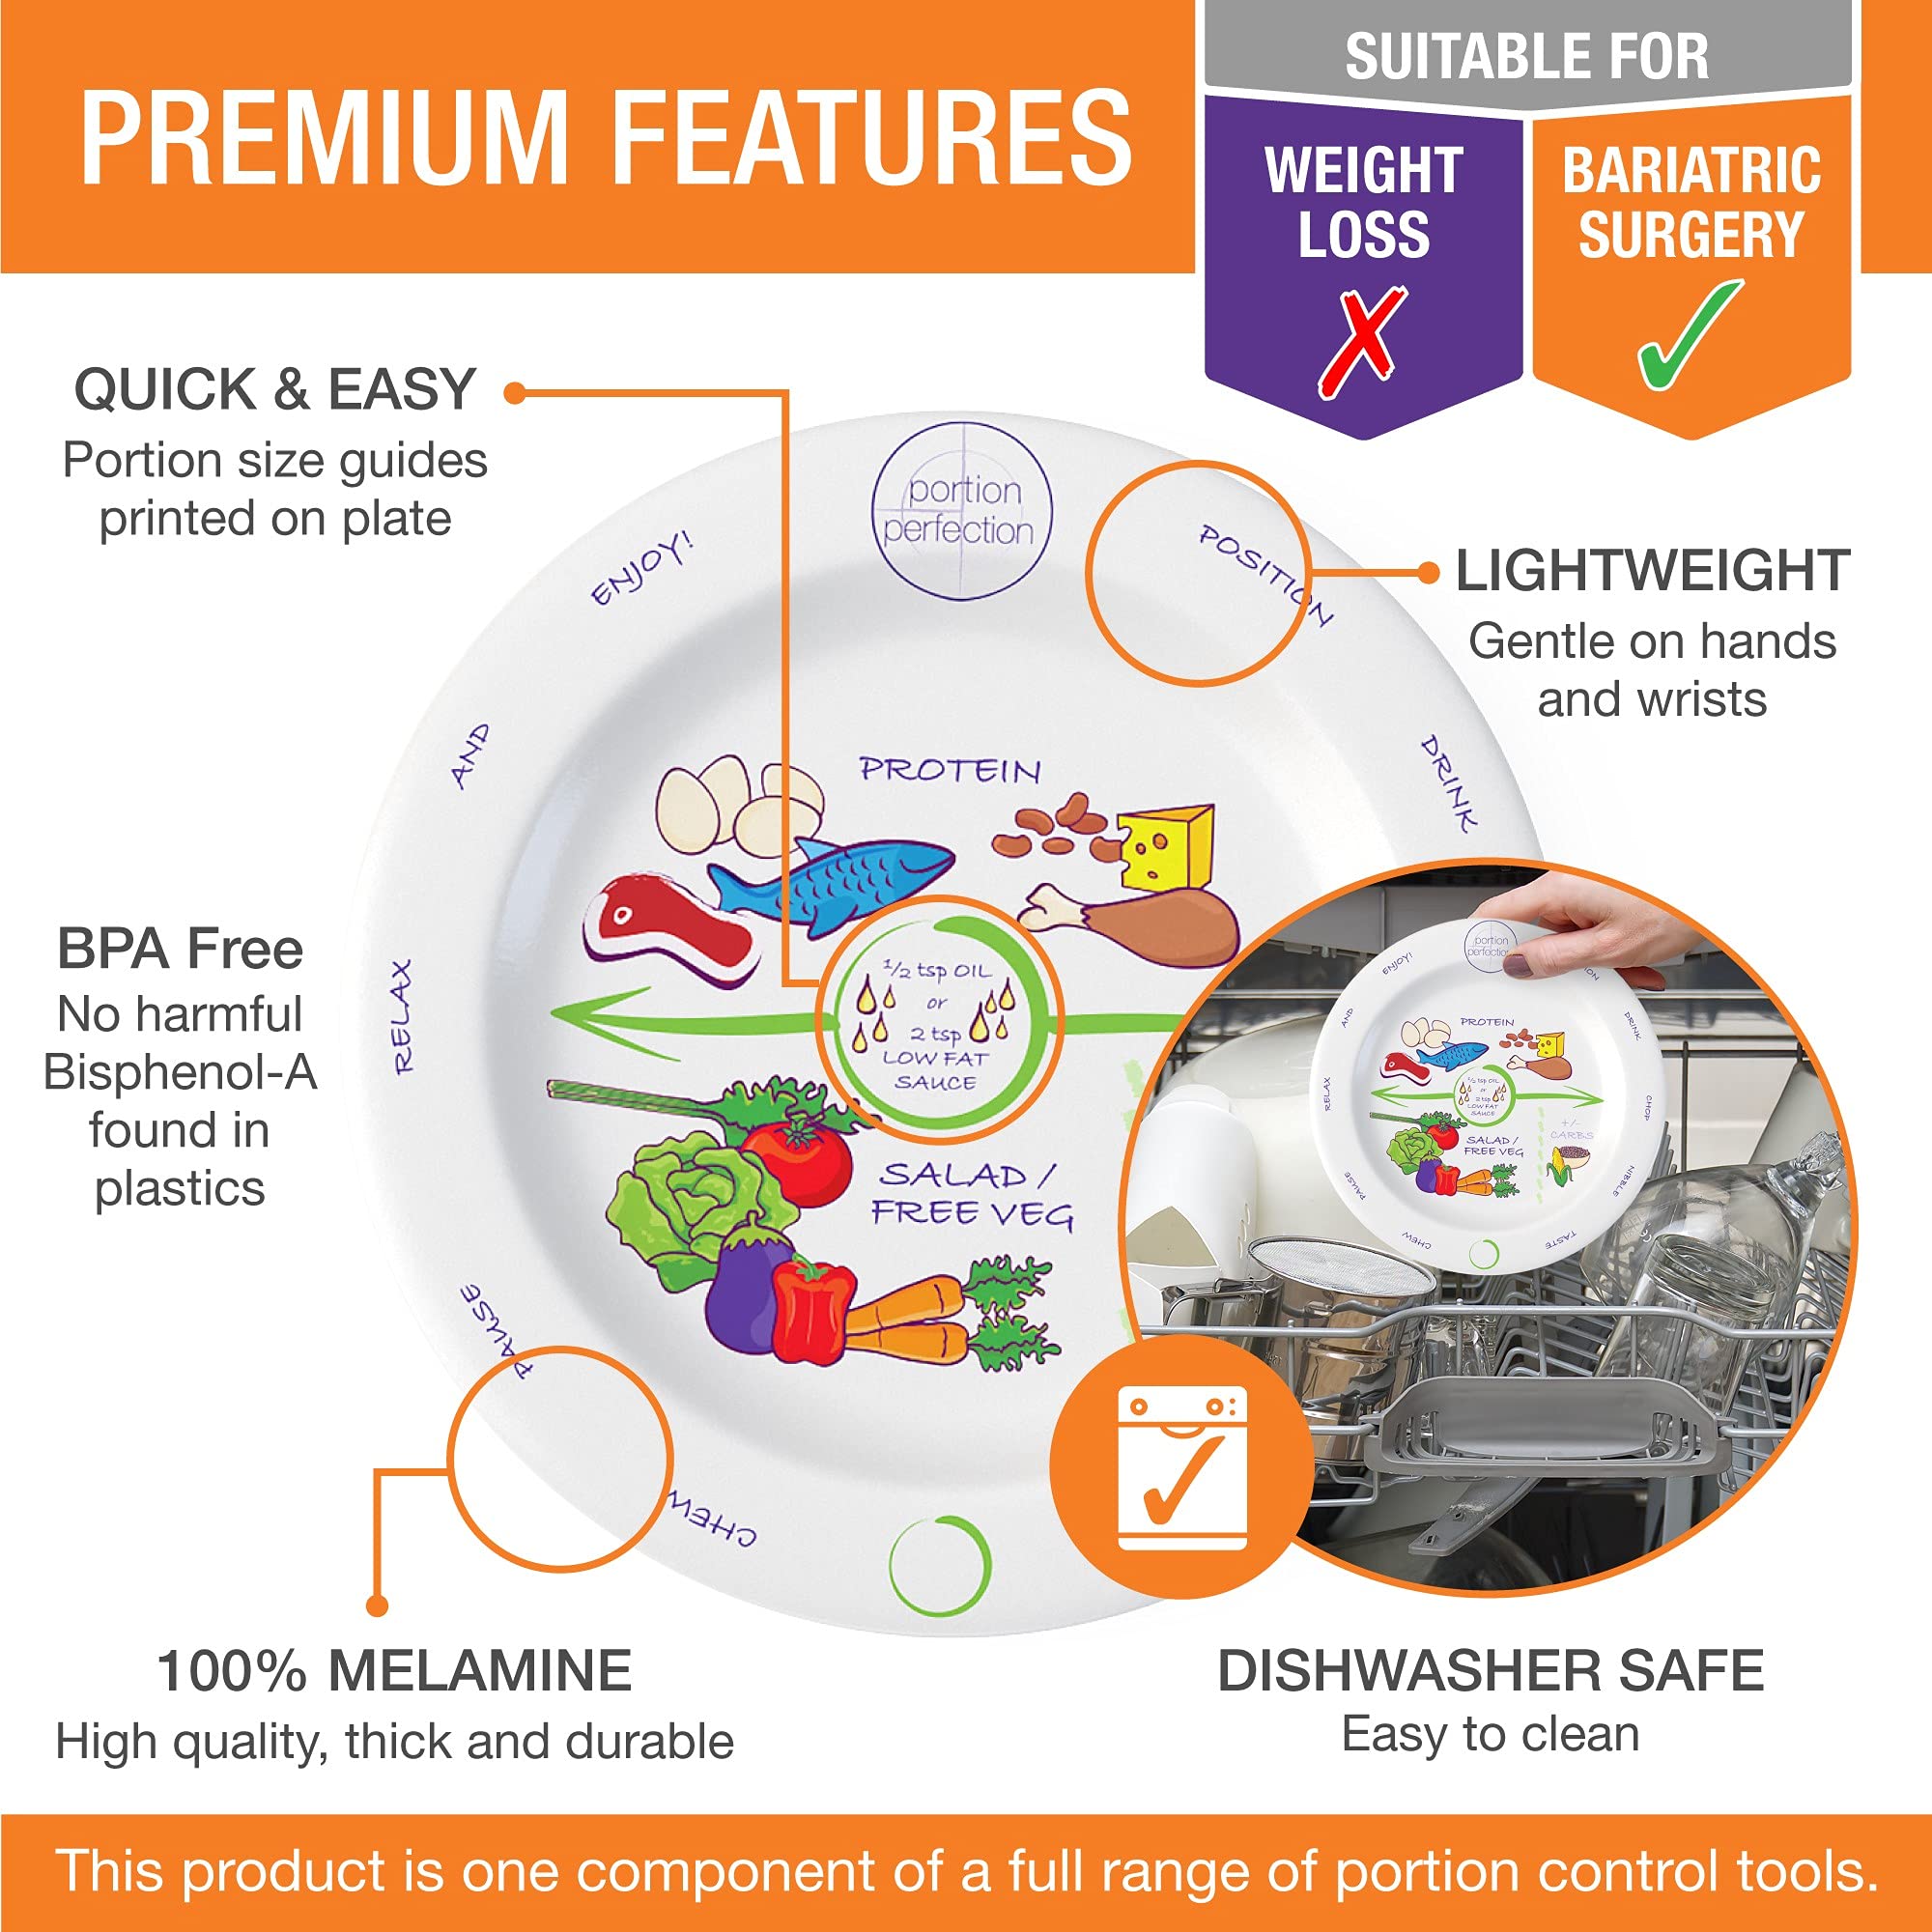 Bariatric Surgery 8 Inch Portion Control Plate x2 Plus 100 Cal Snack Container Set with Instructions for After Gastric Bypass, Sleeve Gastrectomy or Band. Balance Protein, Carbs & Vegetables